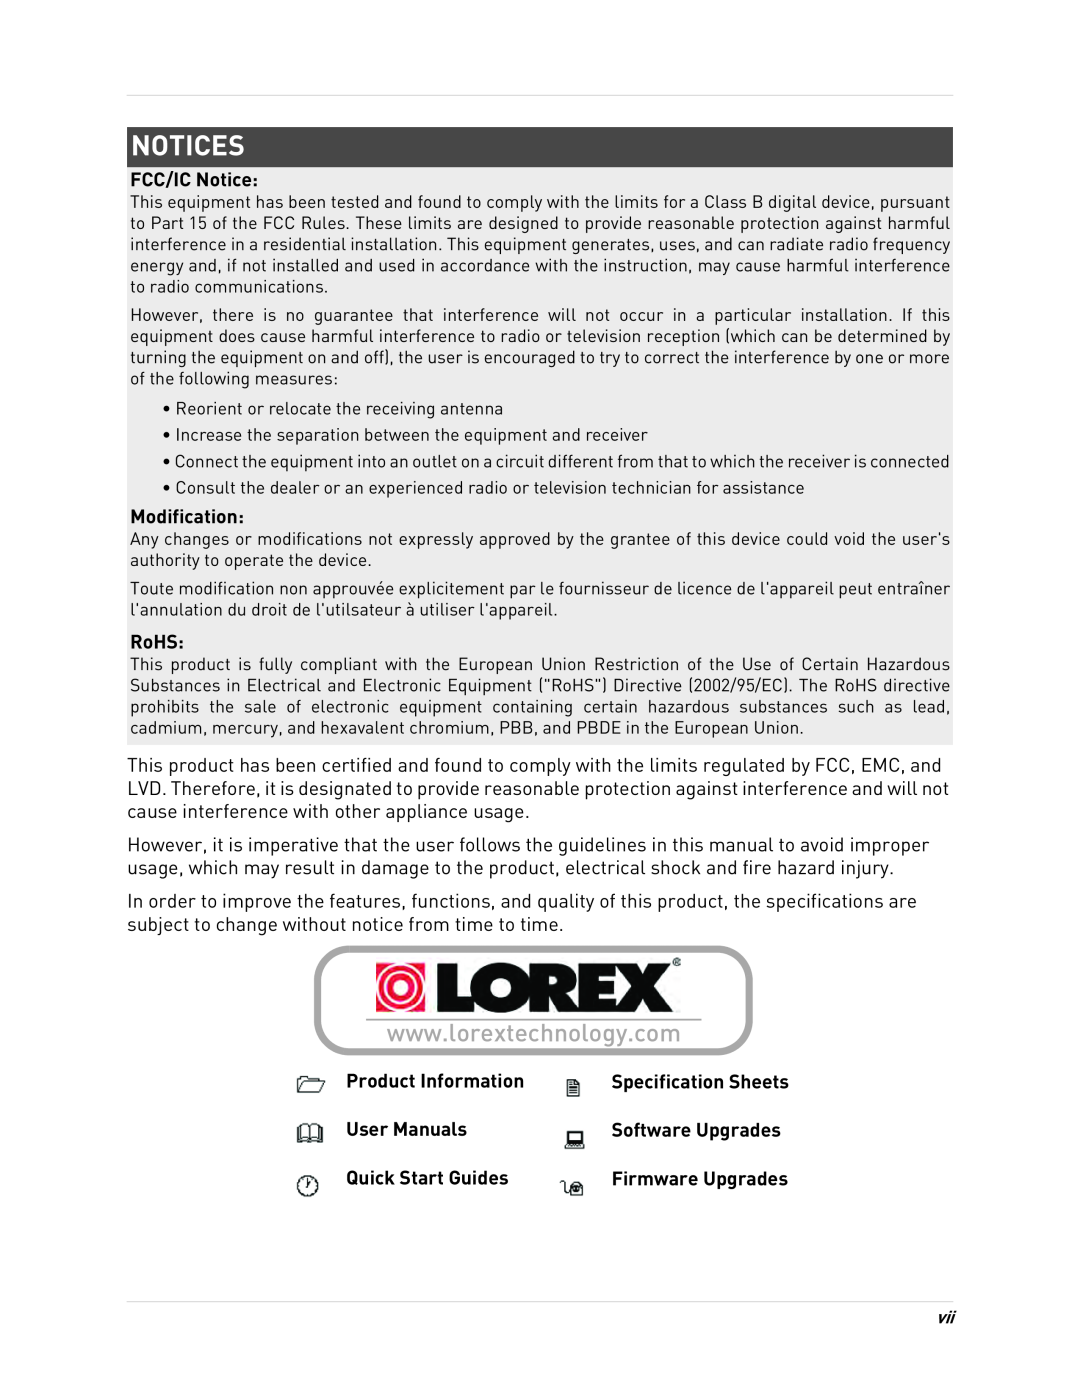 LOREX Technology LH340 EDGE3 Notices, FCC/IC Notice, Modification, RoHS, Product Information, Quick Start Guides 